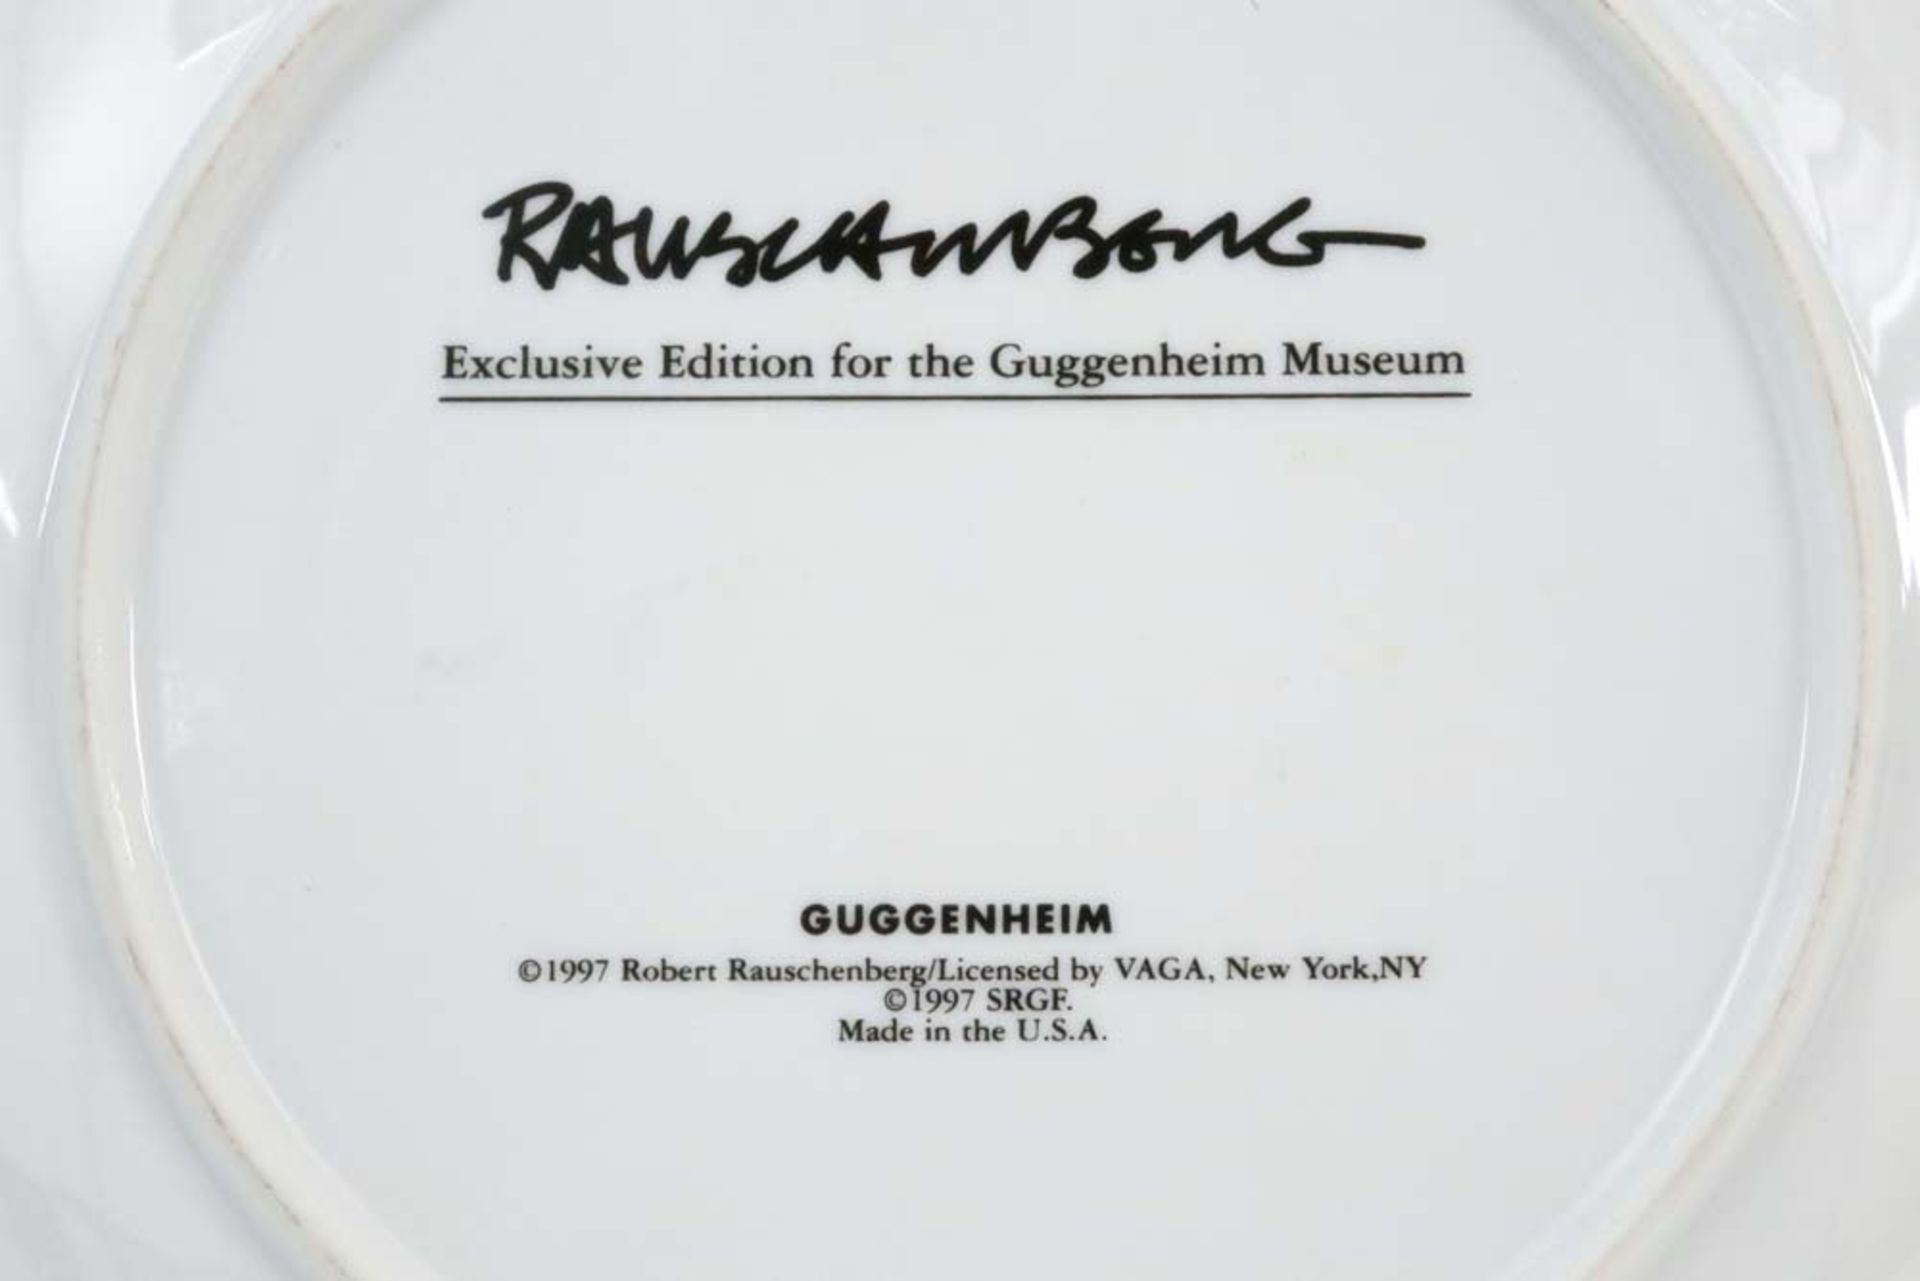 pair of exclusive "SRGF" edition plates, exclusive for the Guggenheim Museum in porcelain with - Bild 3 aus 3